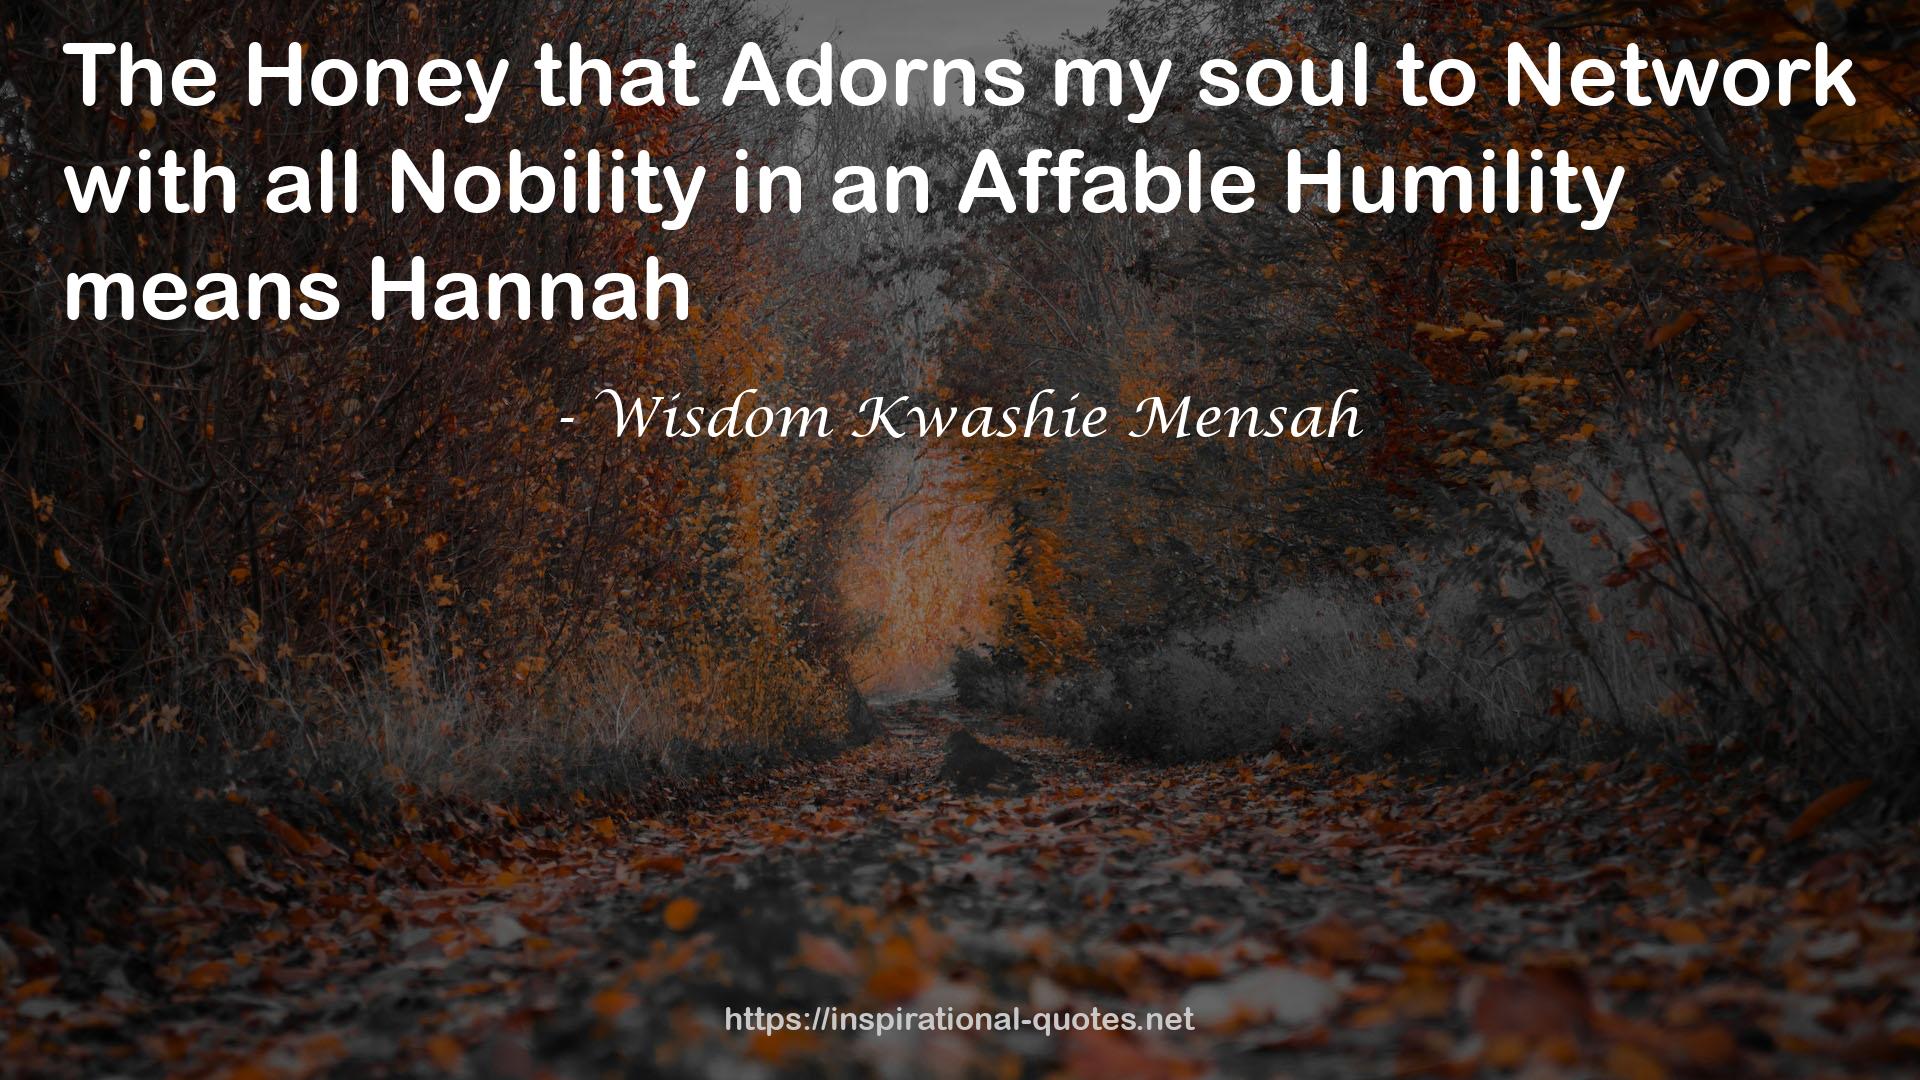 Affable Humility  QUOTES